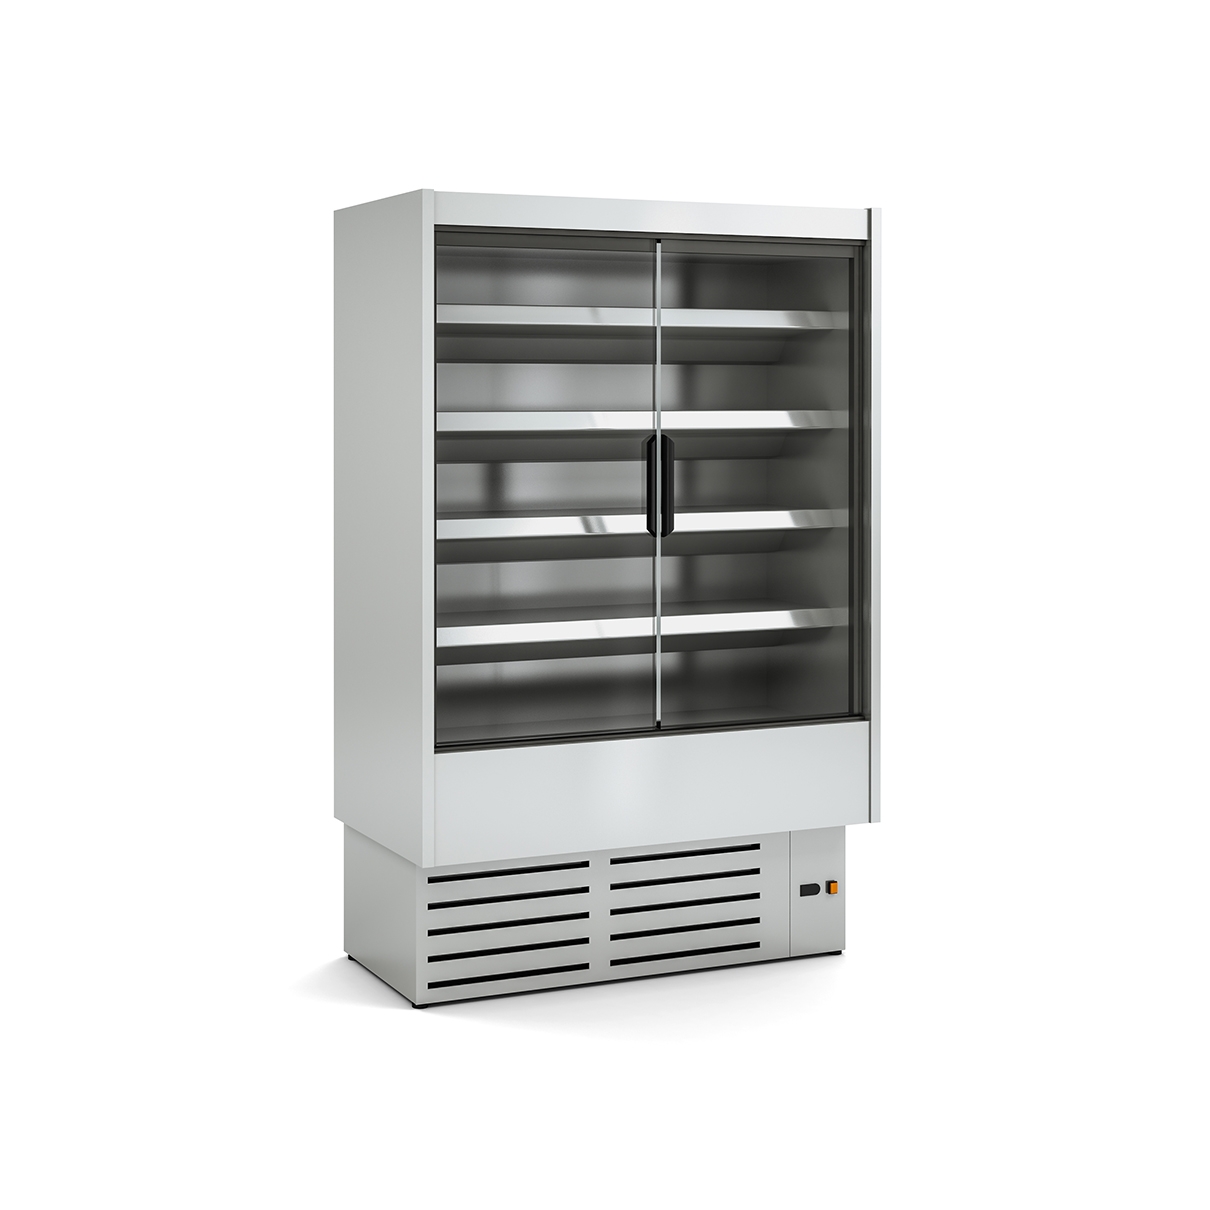 REFRIGERATED WALL-MOUNTED DISPLAY CABINET DG3 I M1-M2